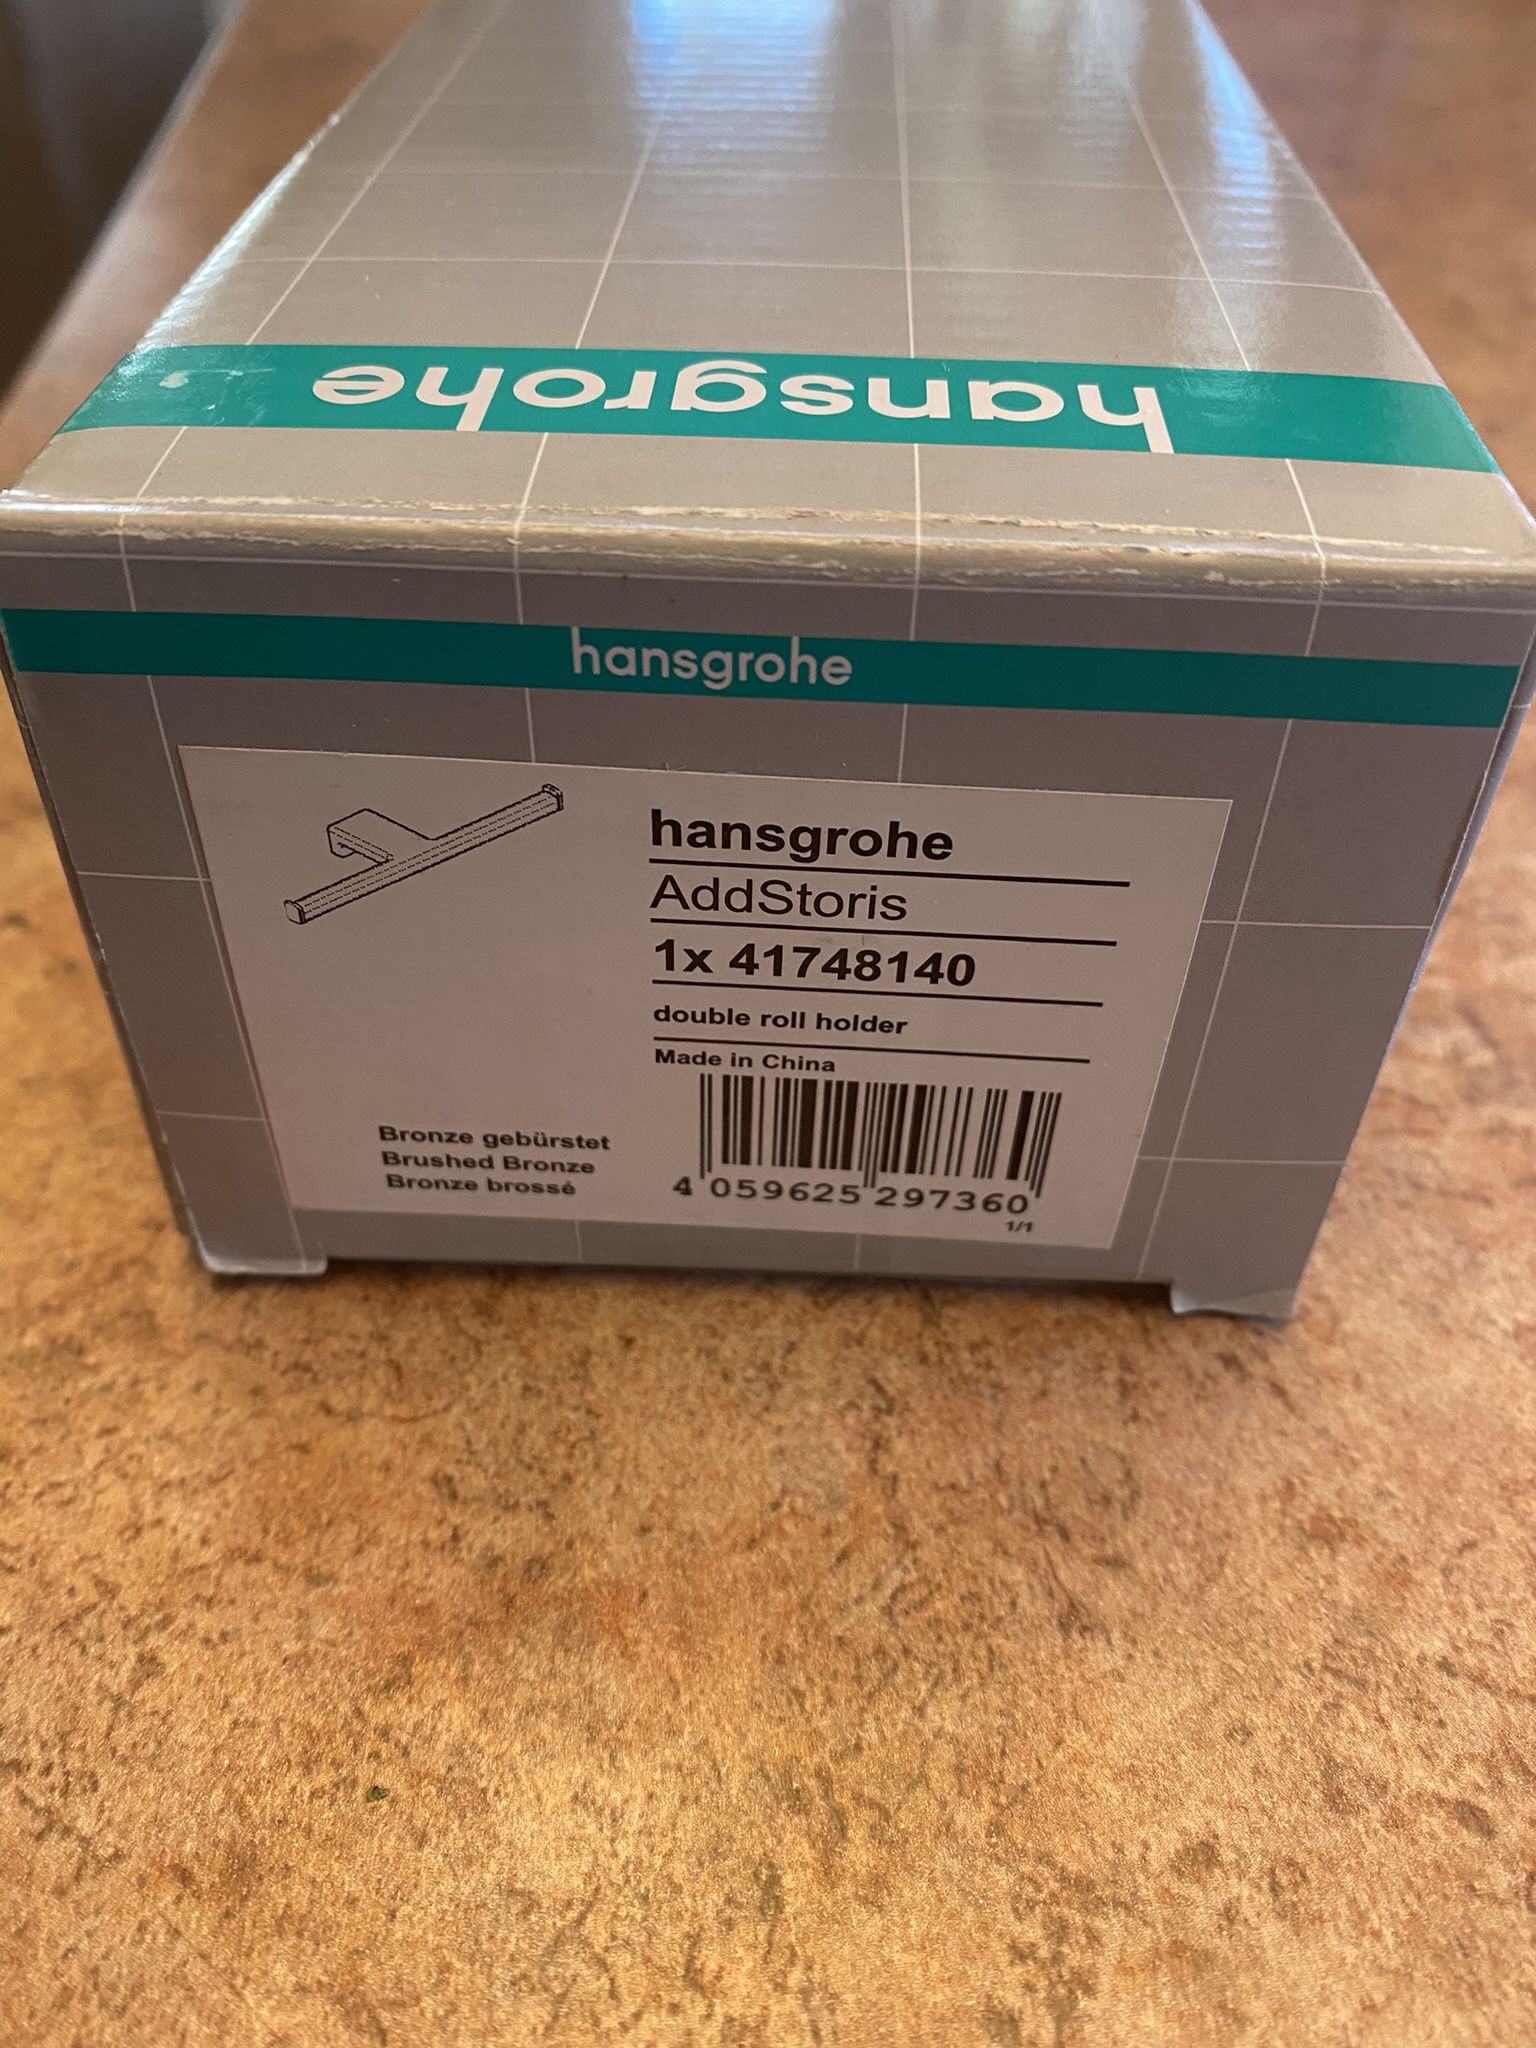 Hansgrohe (contact info removed)0 Bathroom Toilet Paper Holder